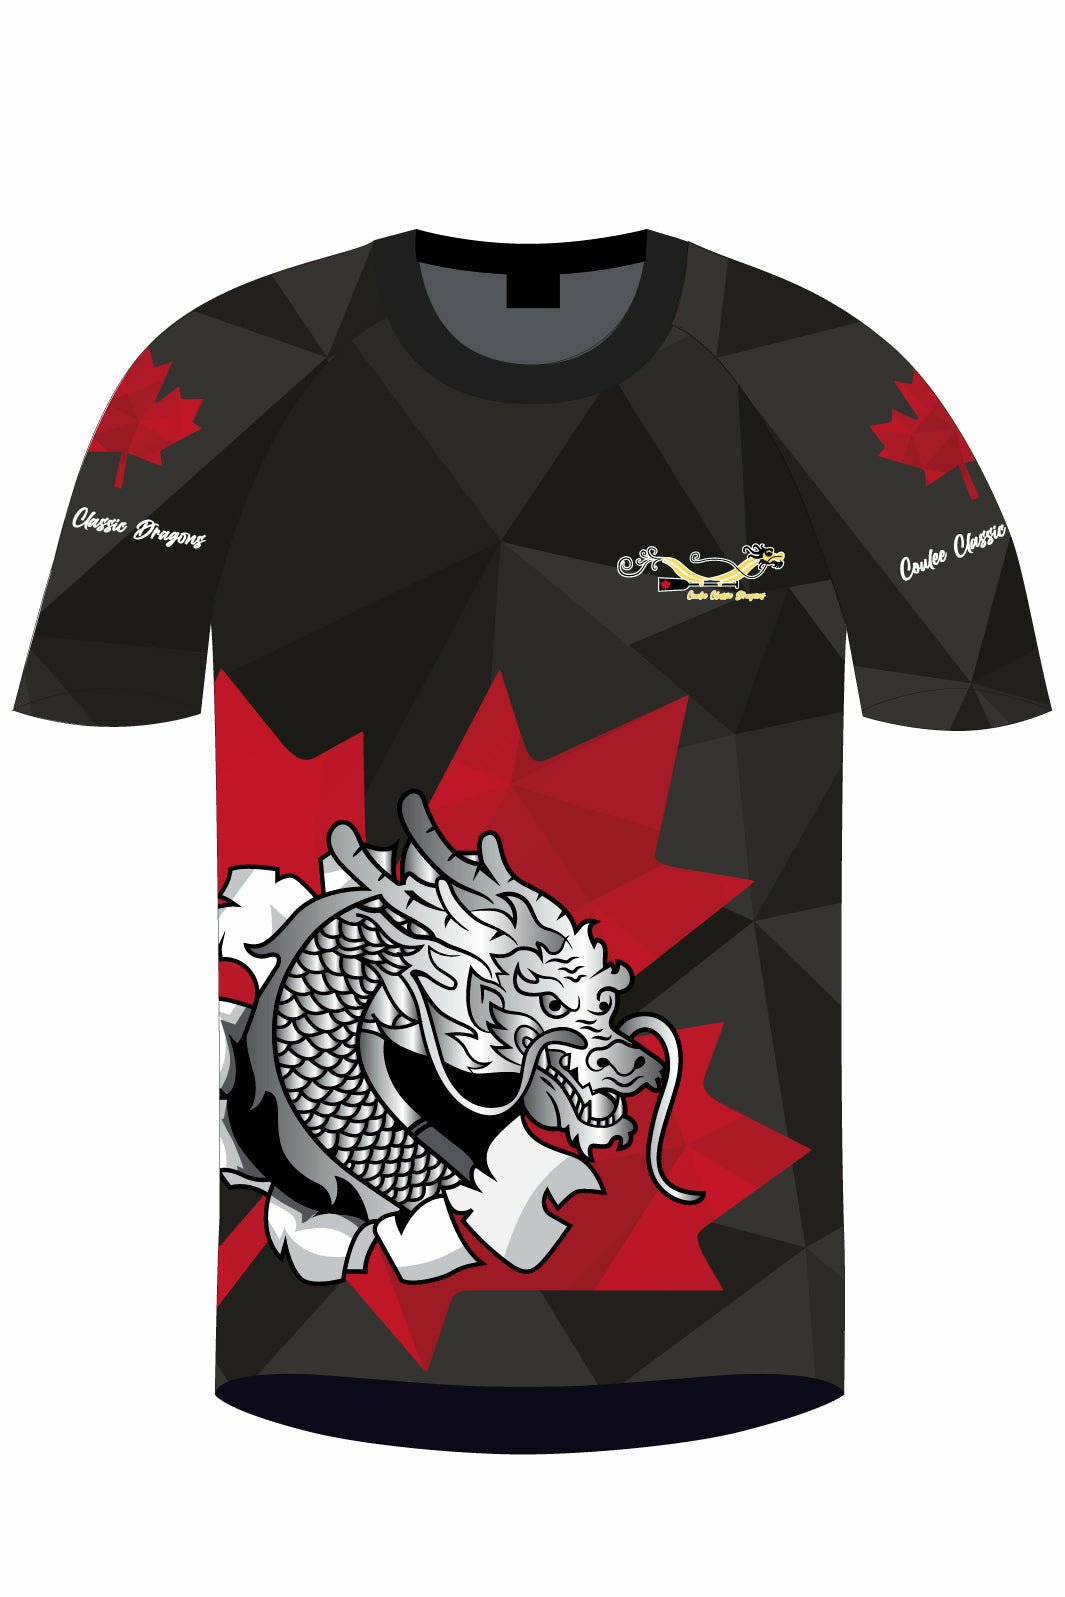 Coulee Classic Dragons Unisex h2O Team Jersey Short Sleeve - Oddball Workshop